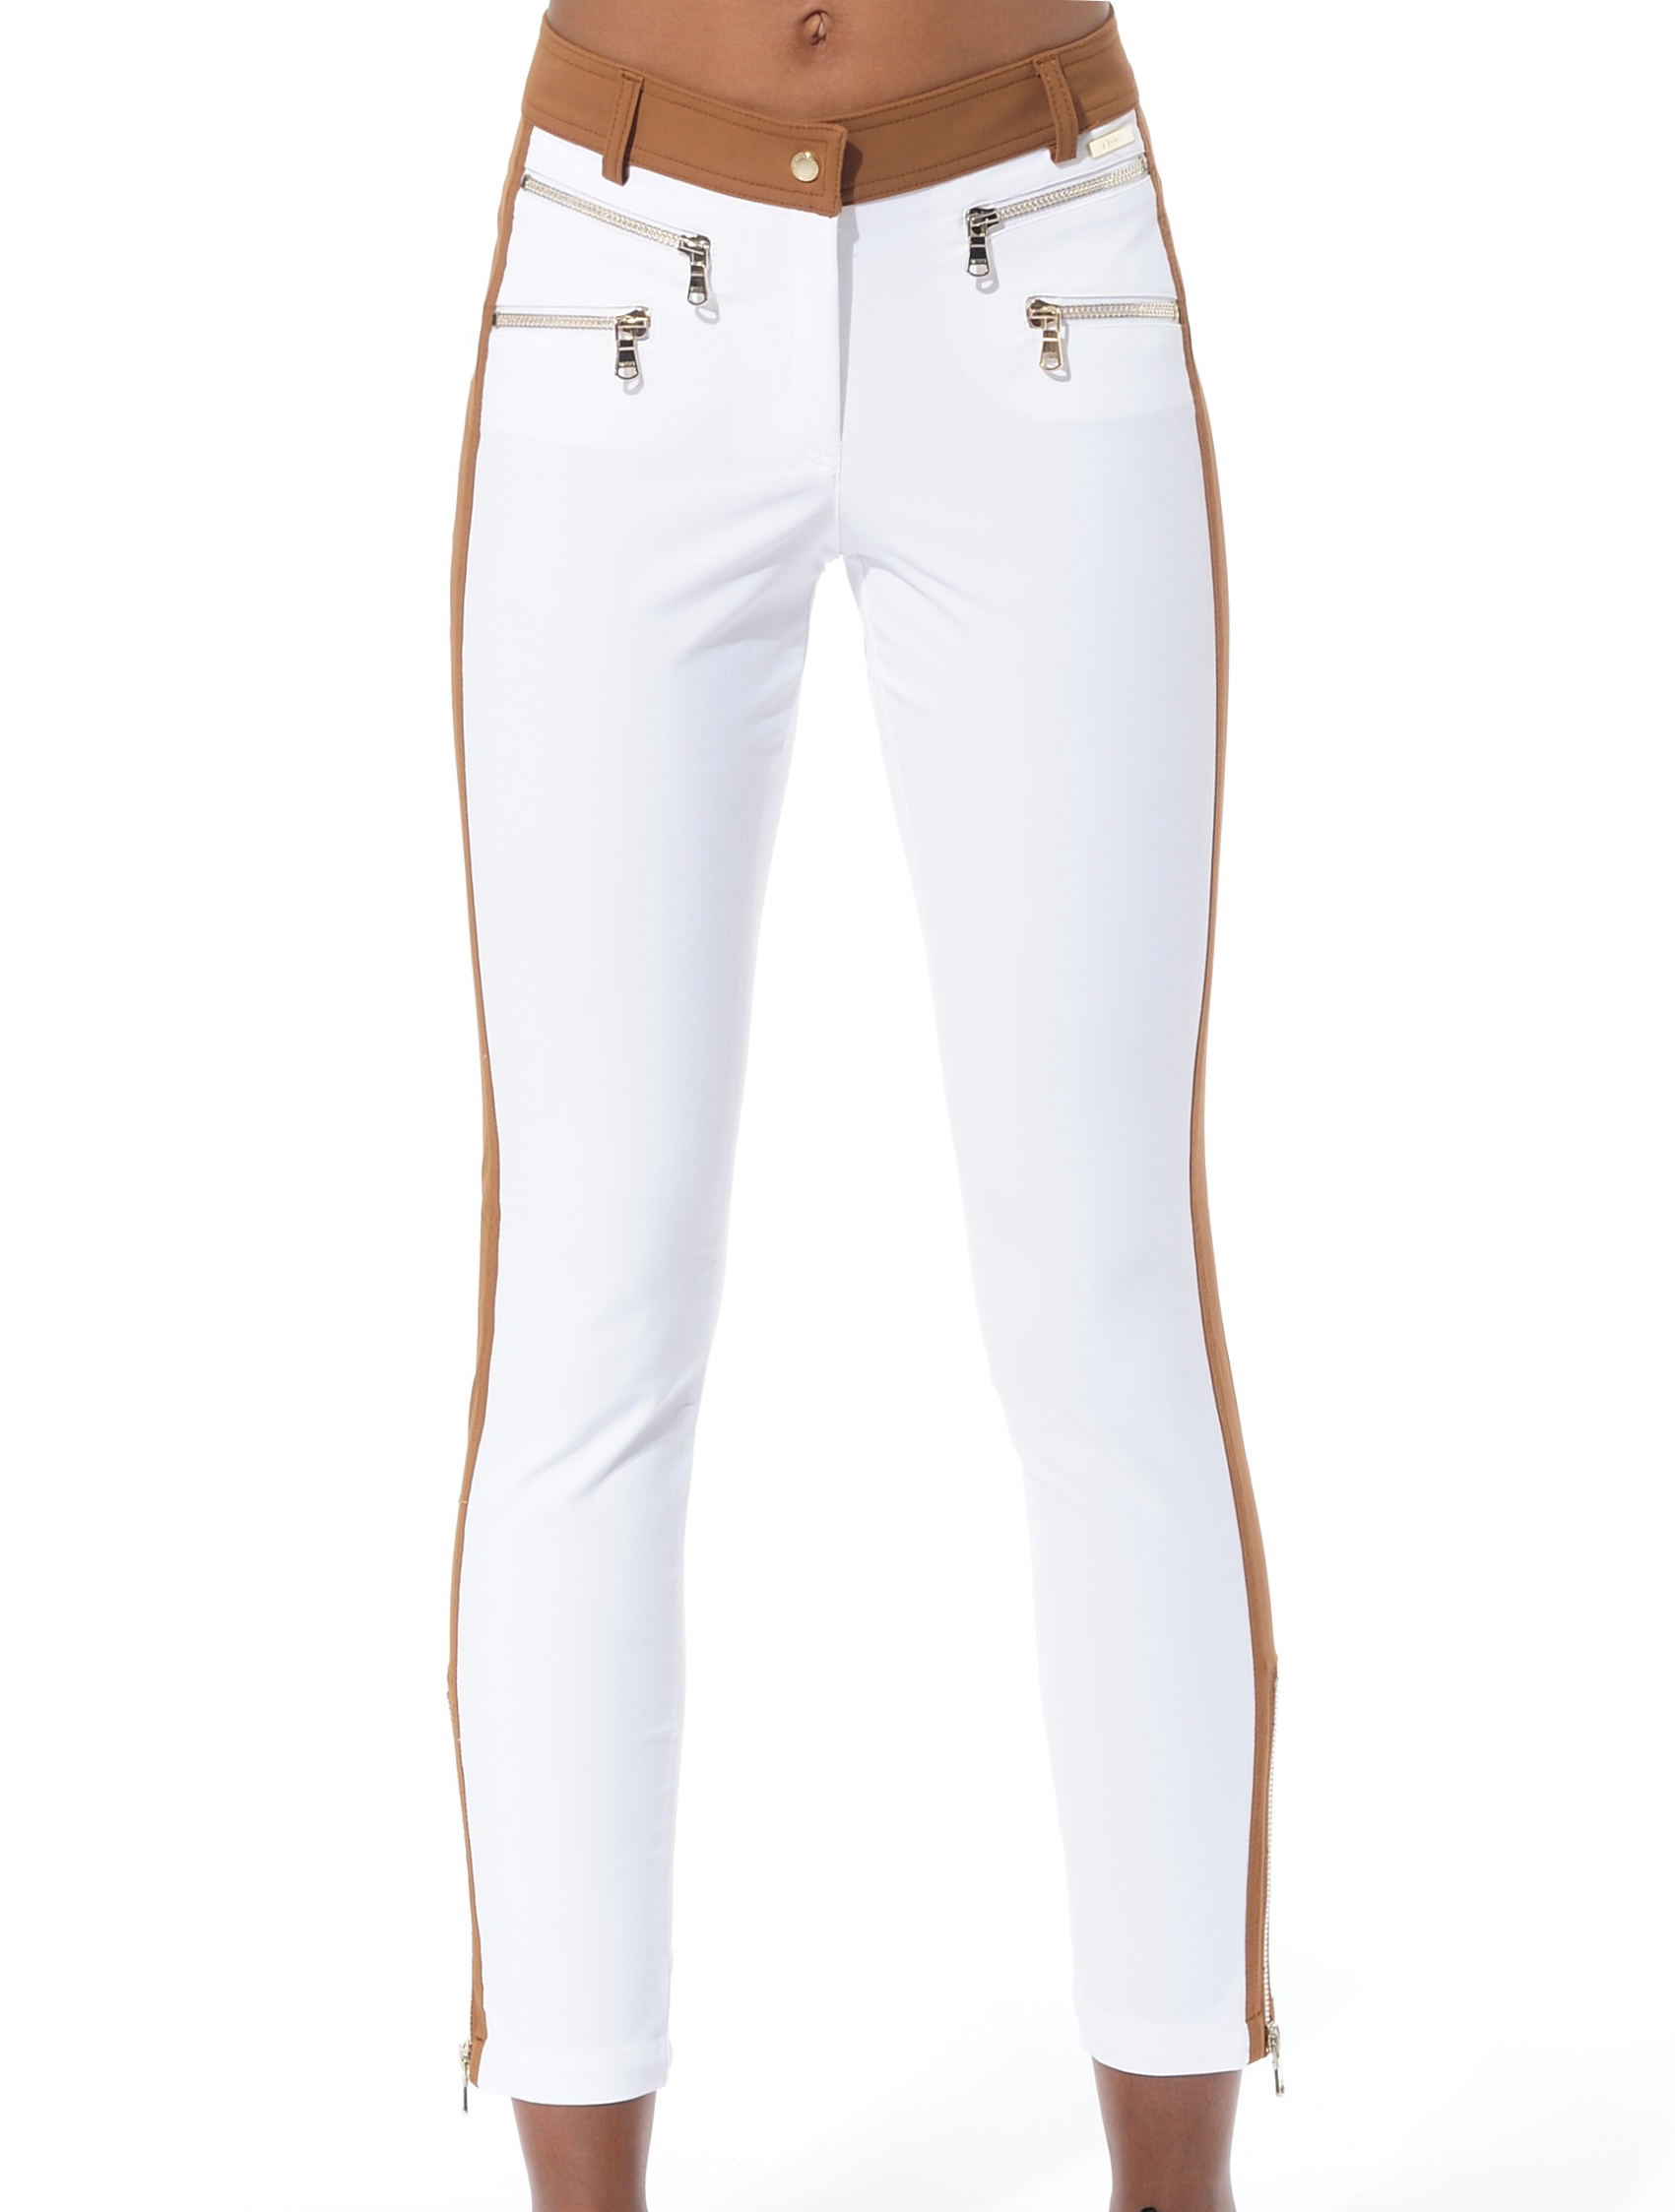 4way stretch double zip ankle pants white/ocre 